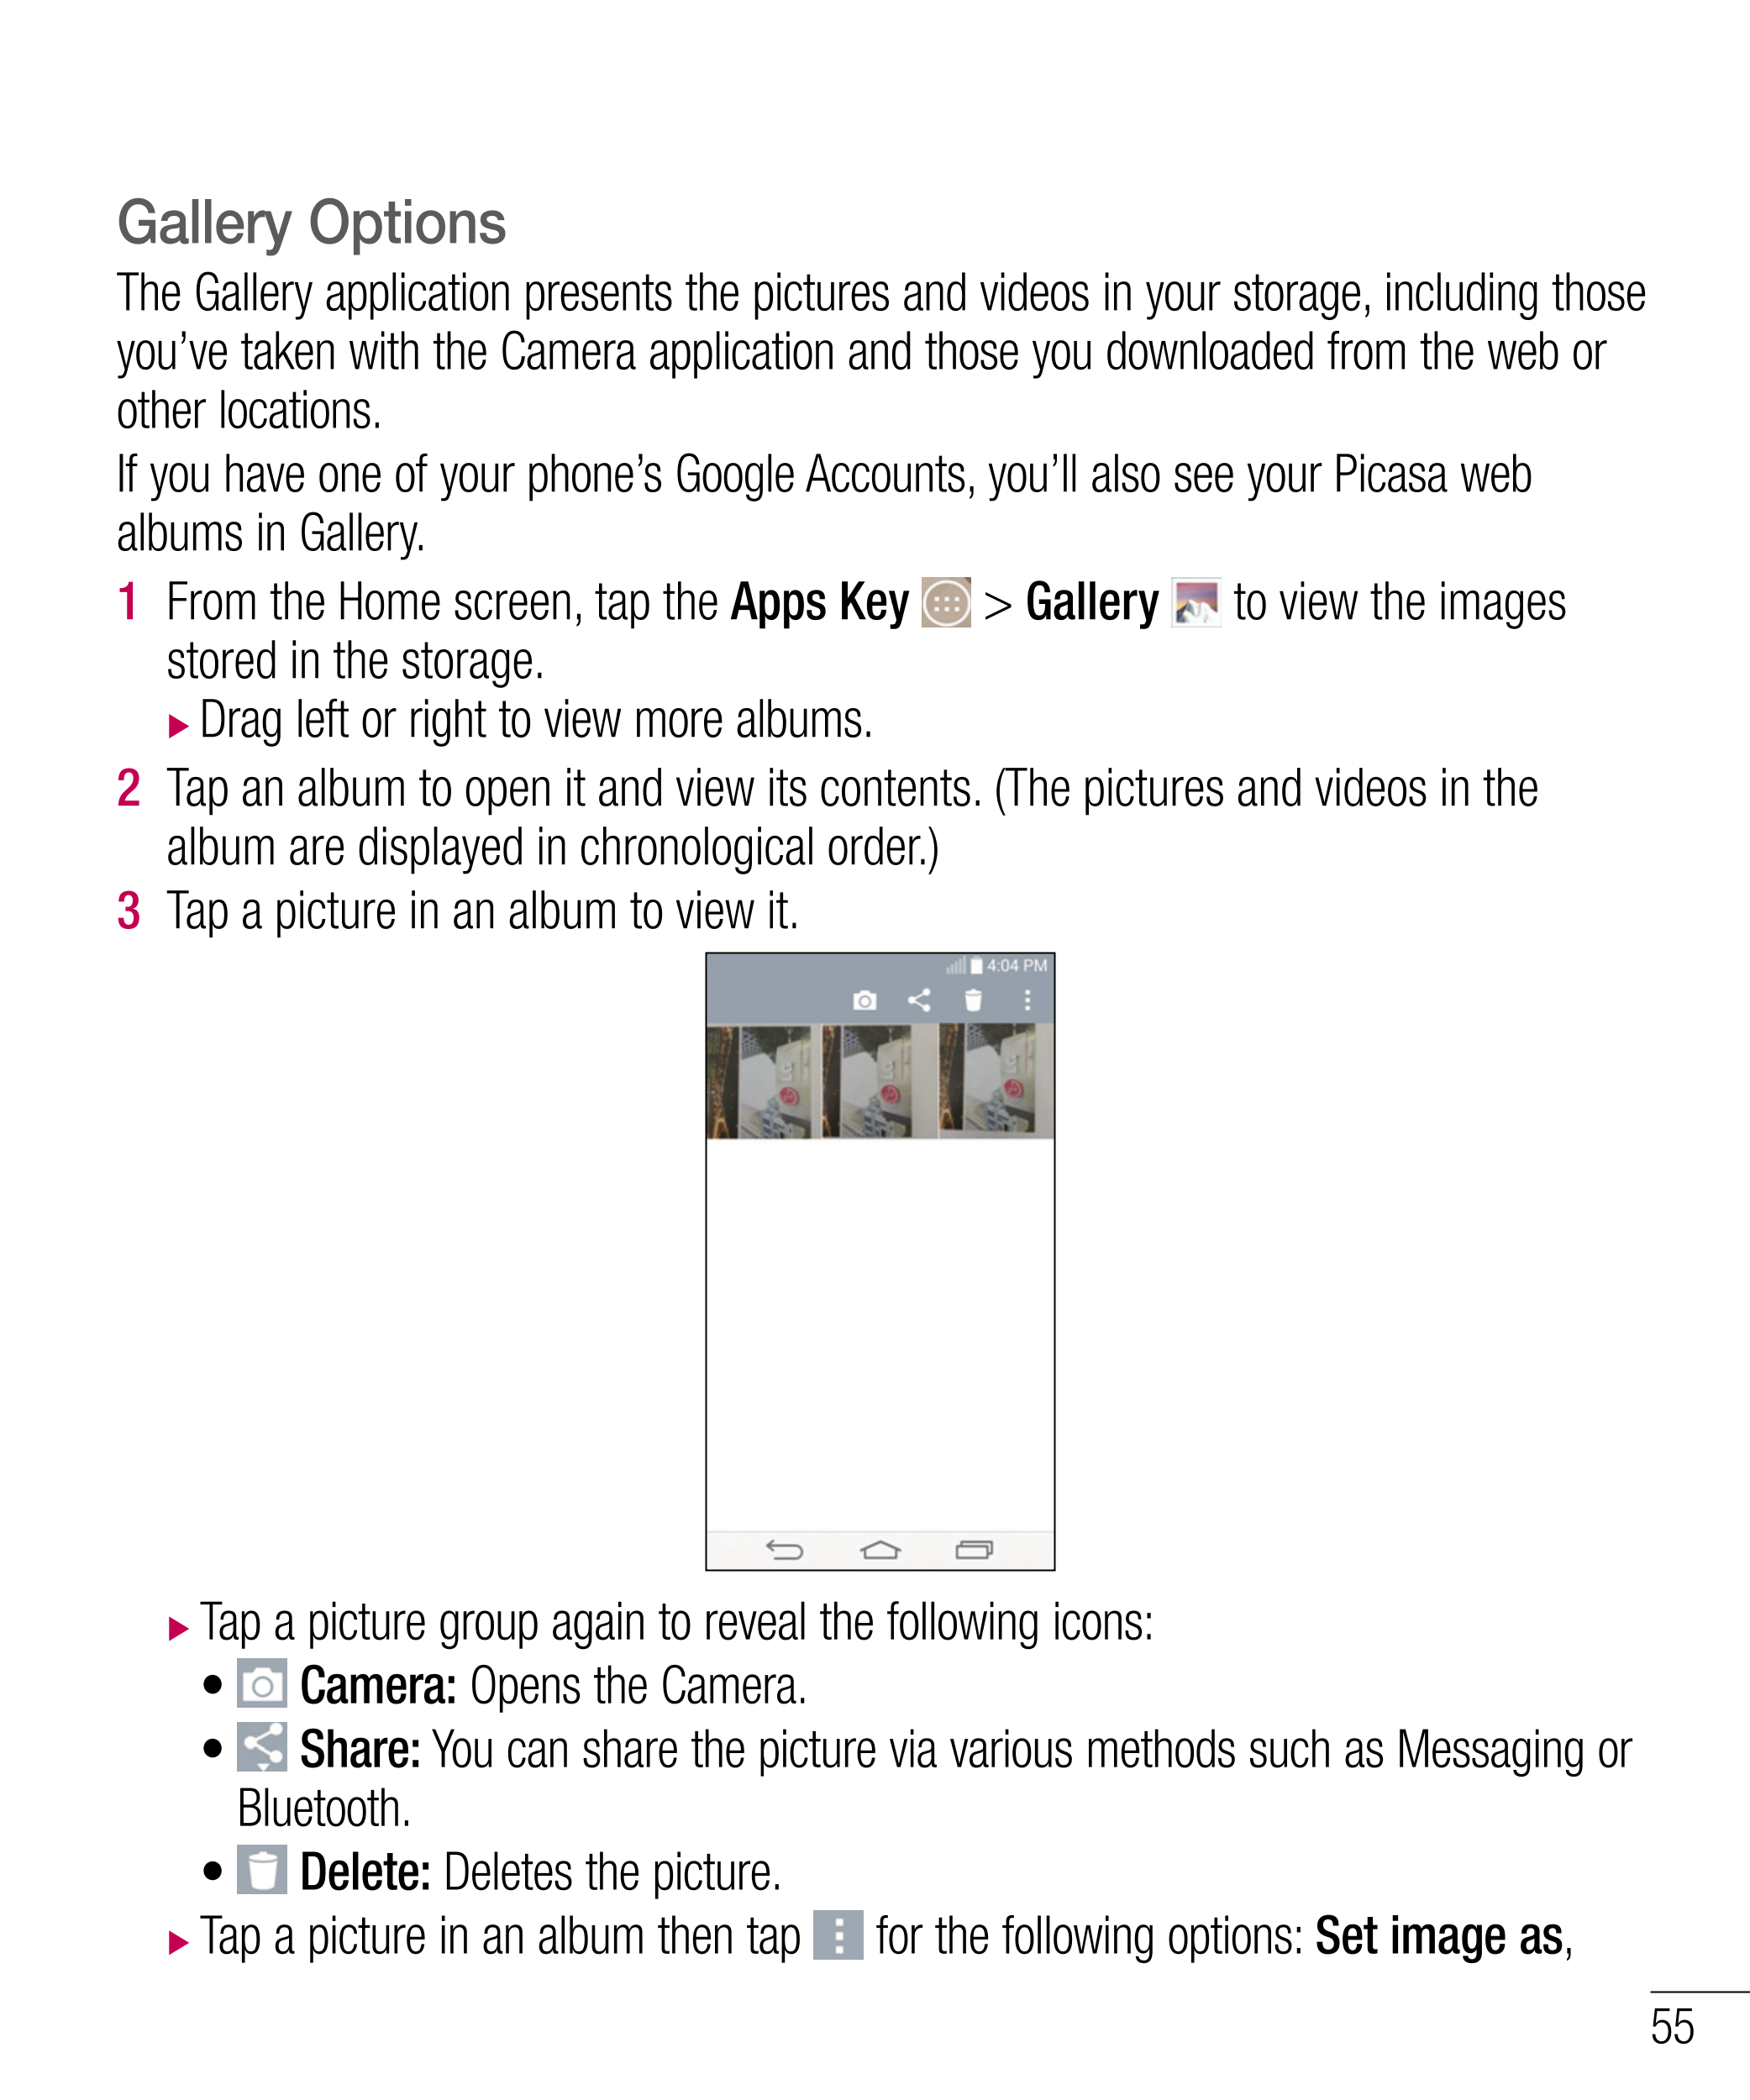 Gallery Options
The Gallery application presents the pictures and videos in your storage, including those 
you’ve taken with the